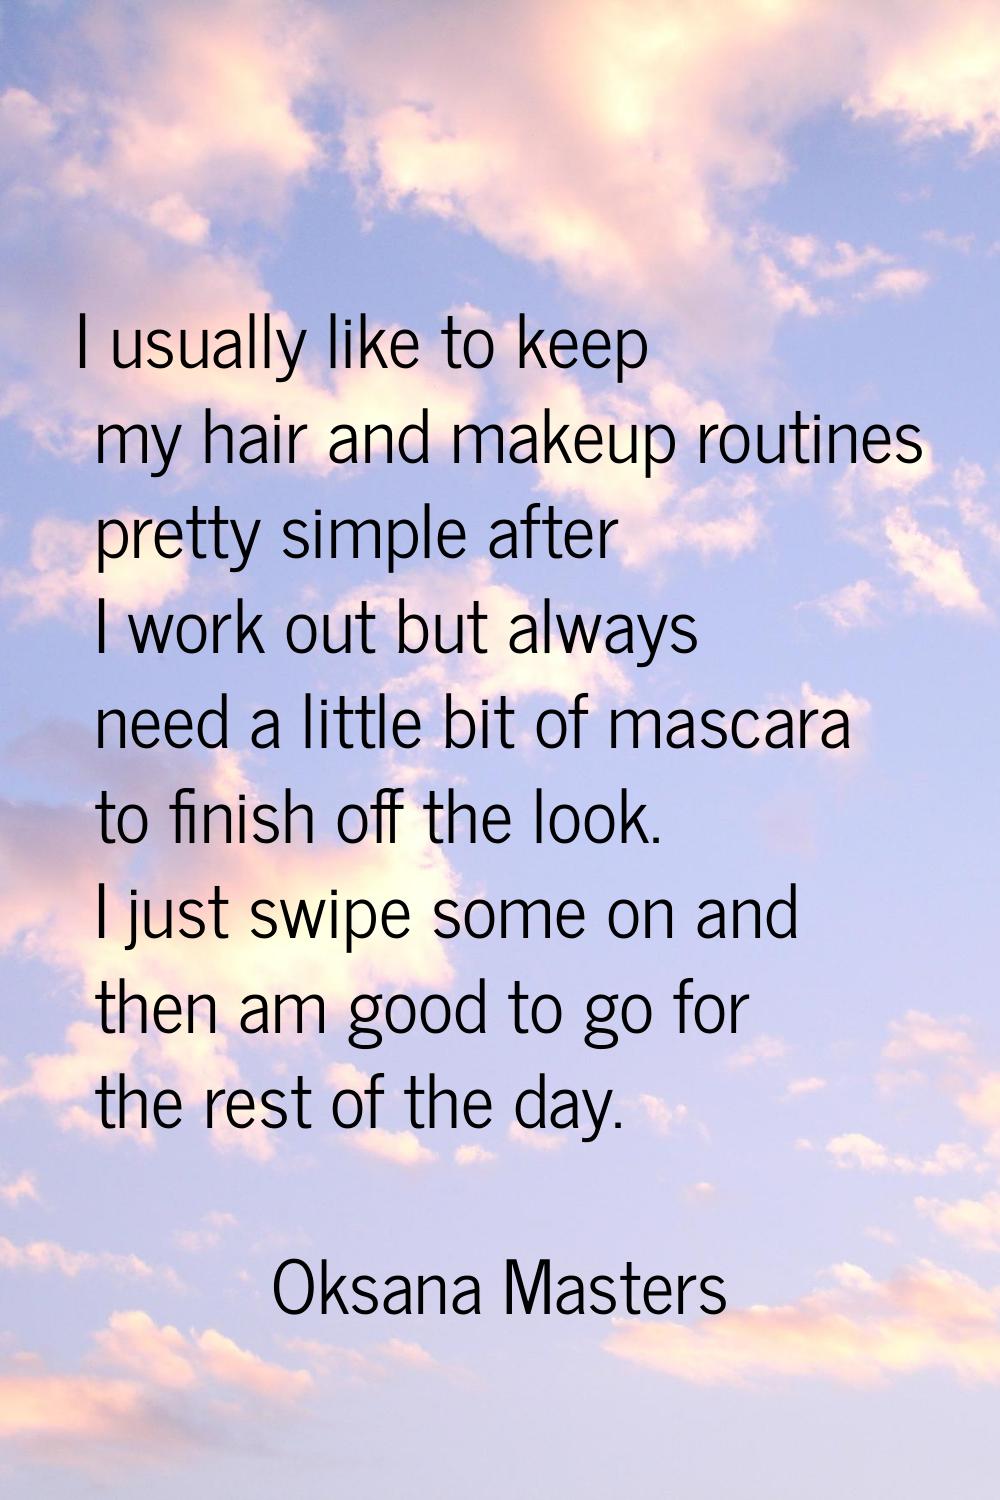 I usually like to keep my hair and makeup routines pretty simple after I work out but always need a